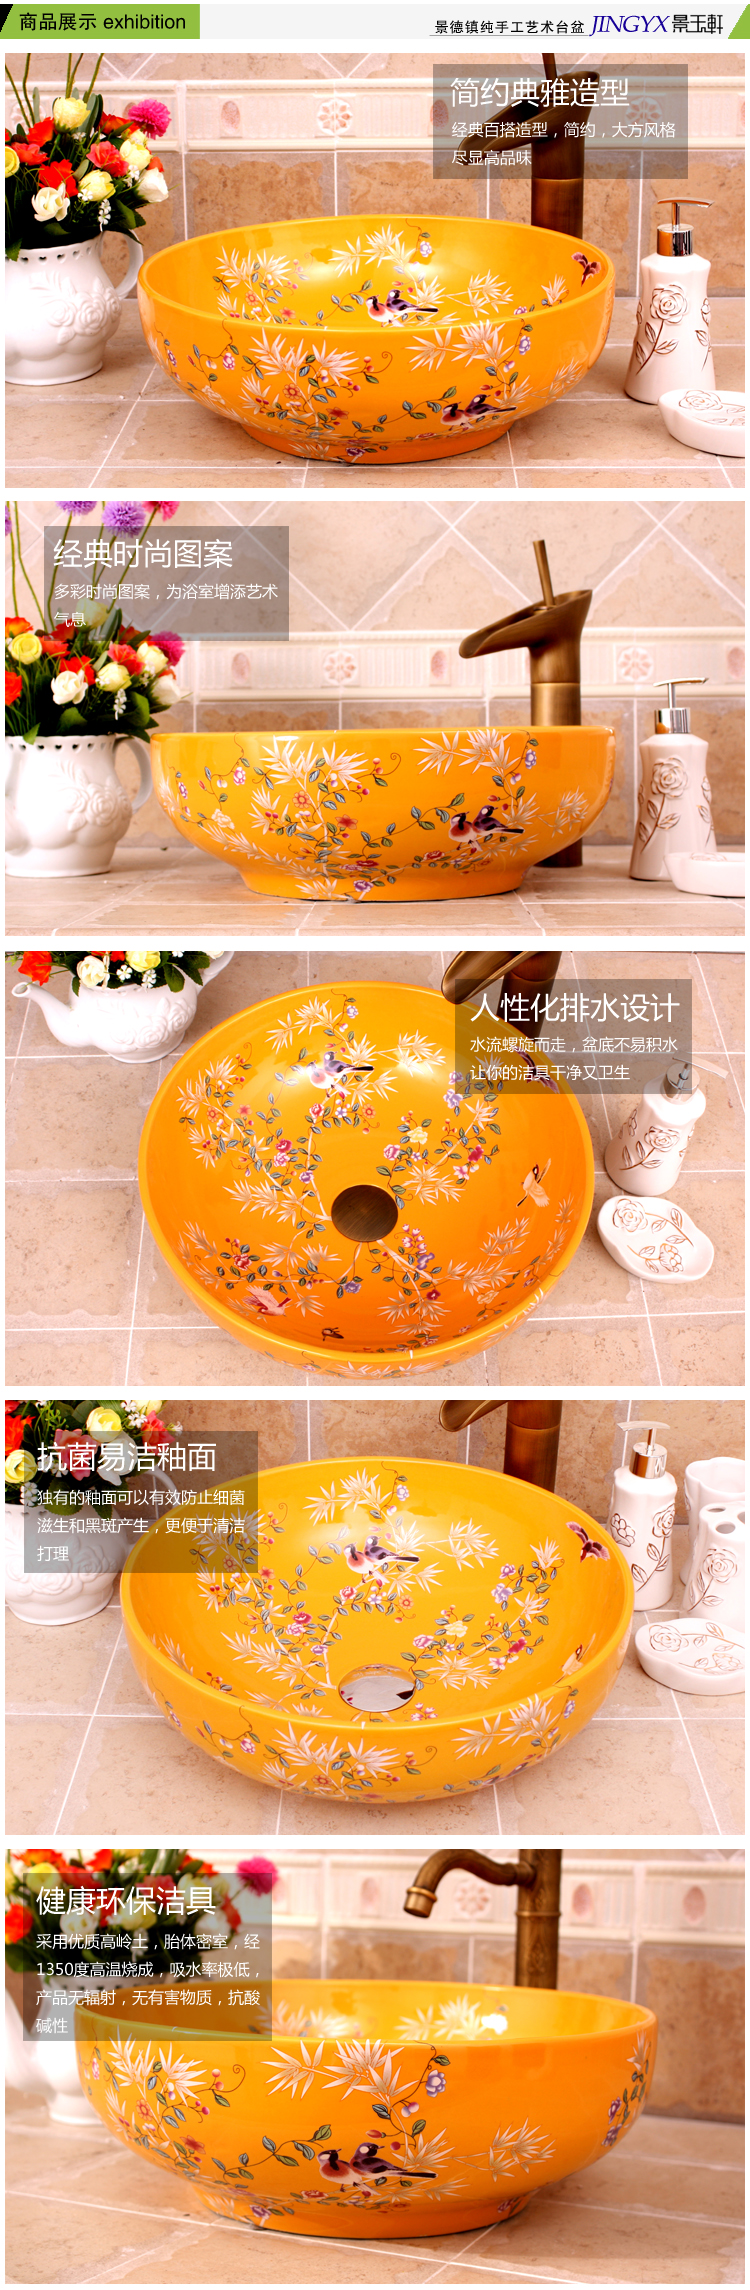 Jingdezhen ceramic JingYuXuan colorful painting of flowers and blue and white ceramic art basin that wash a face sink much money